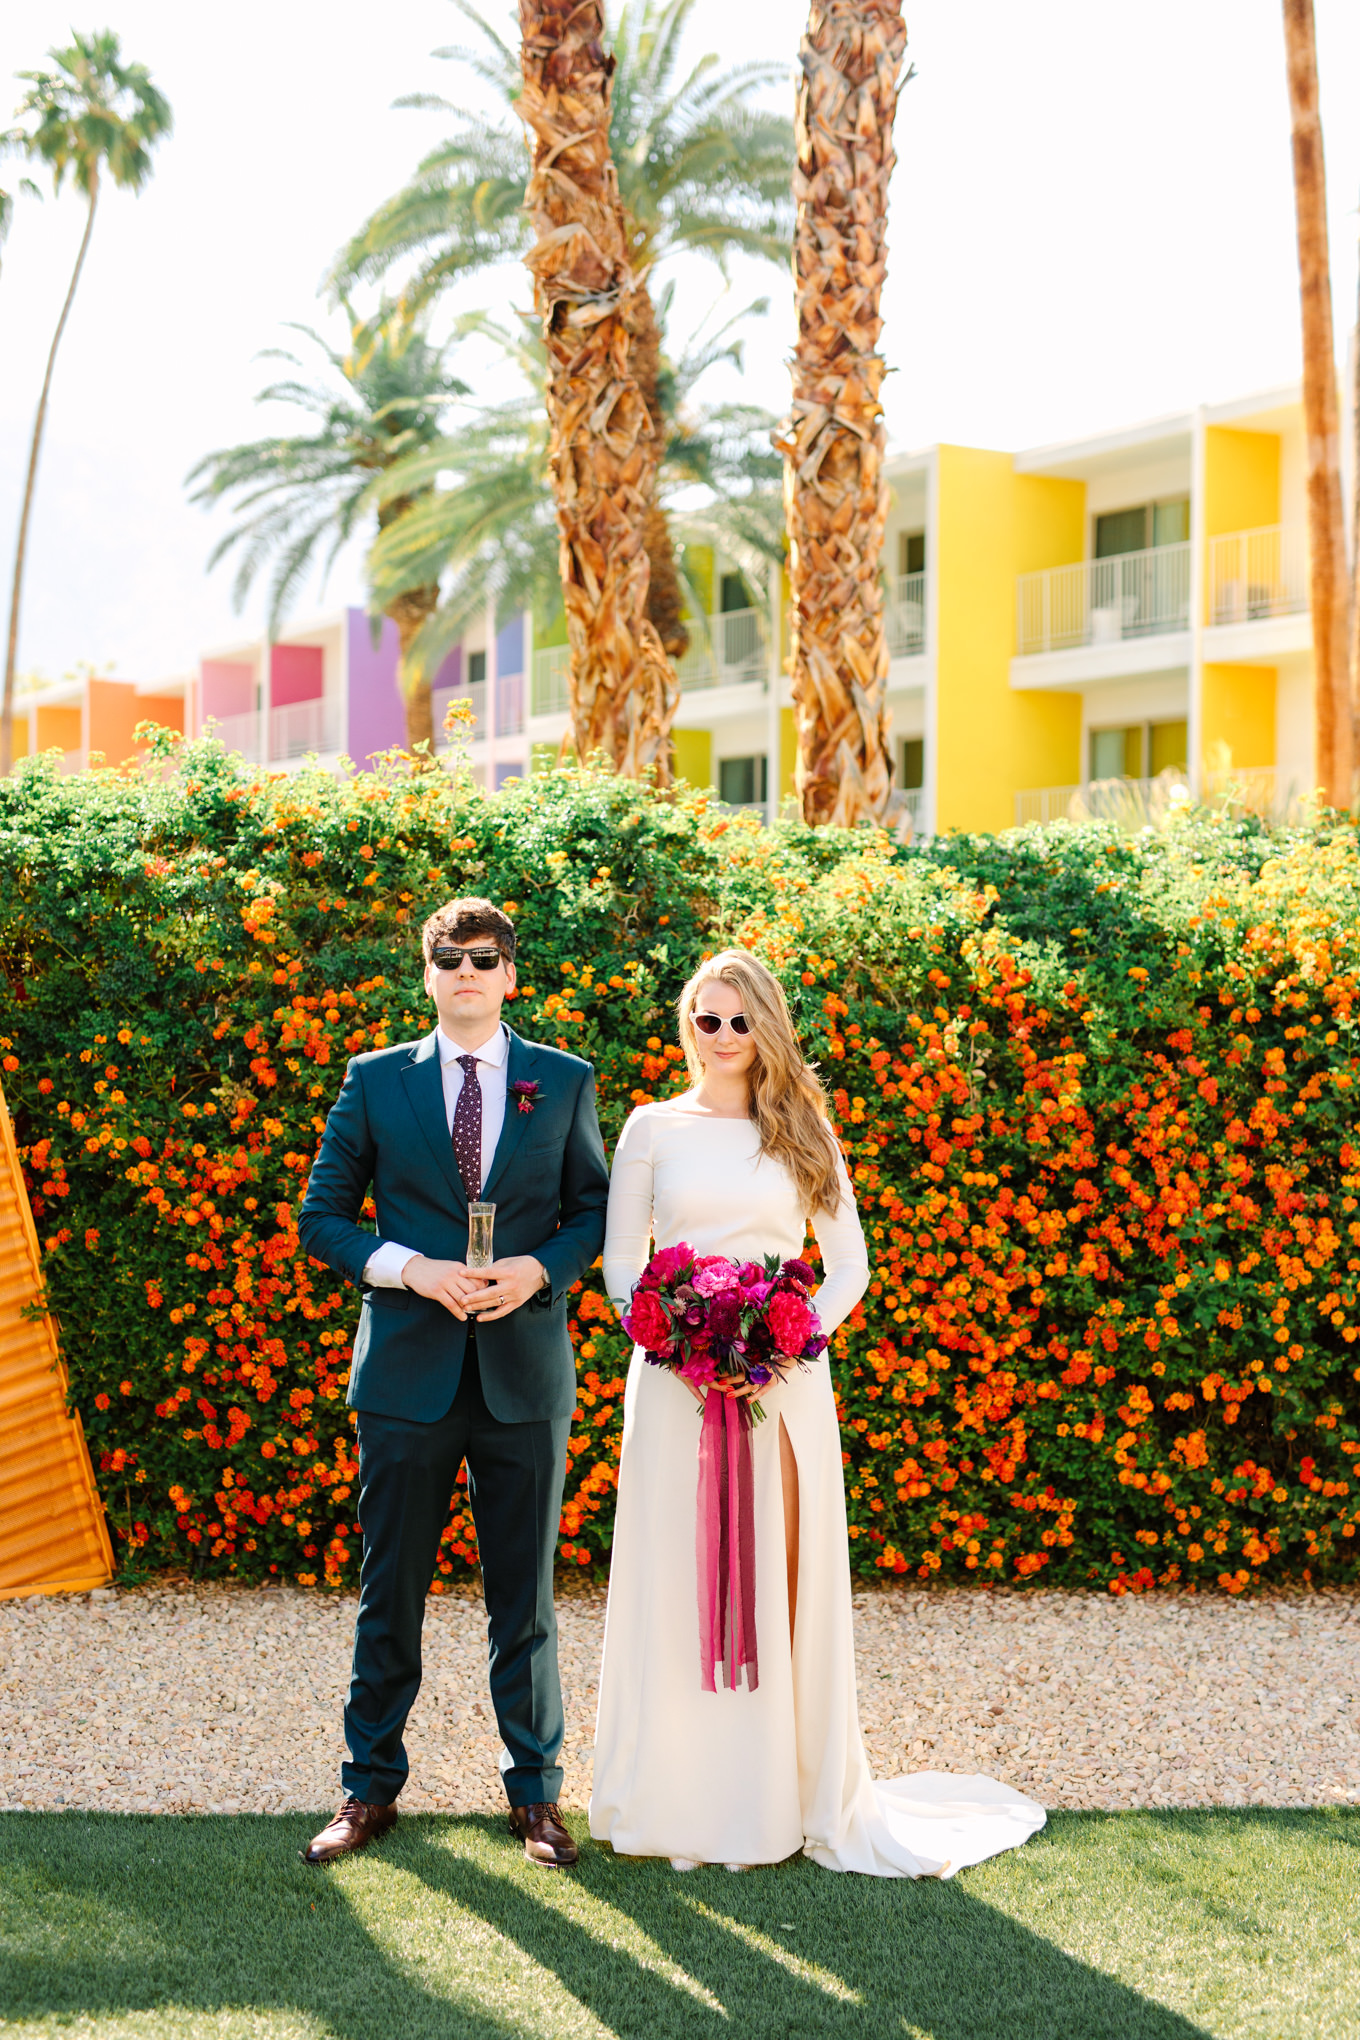 Bride and groom drinking champagne at Saguaro Palm Springs | Colorful jewel tone Palm Springs elopement | Fresh and colorful photography for fun-loving couples in Southern California | #colorfulelopement #palmspringselopement #elopementphotography #palmspringswedding Source: Mary Costa Photography | Los Angeles